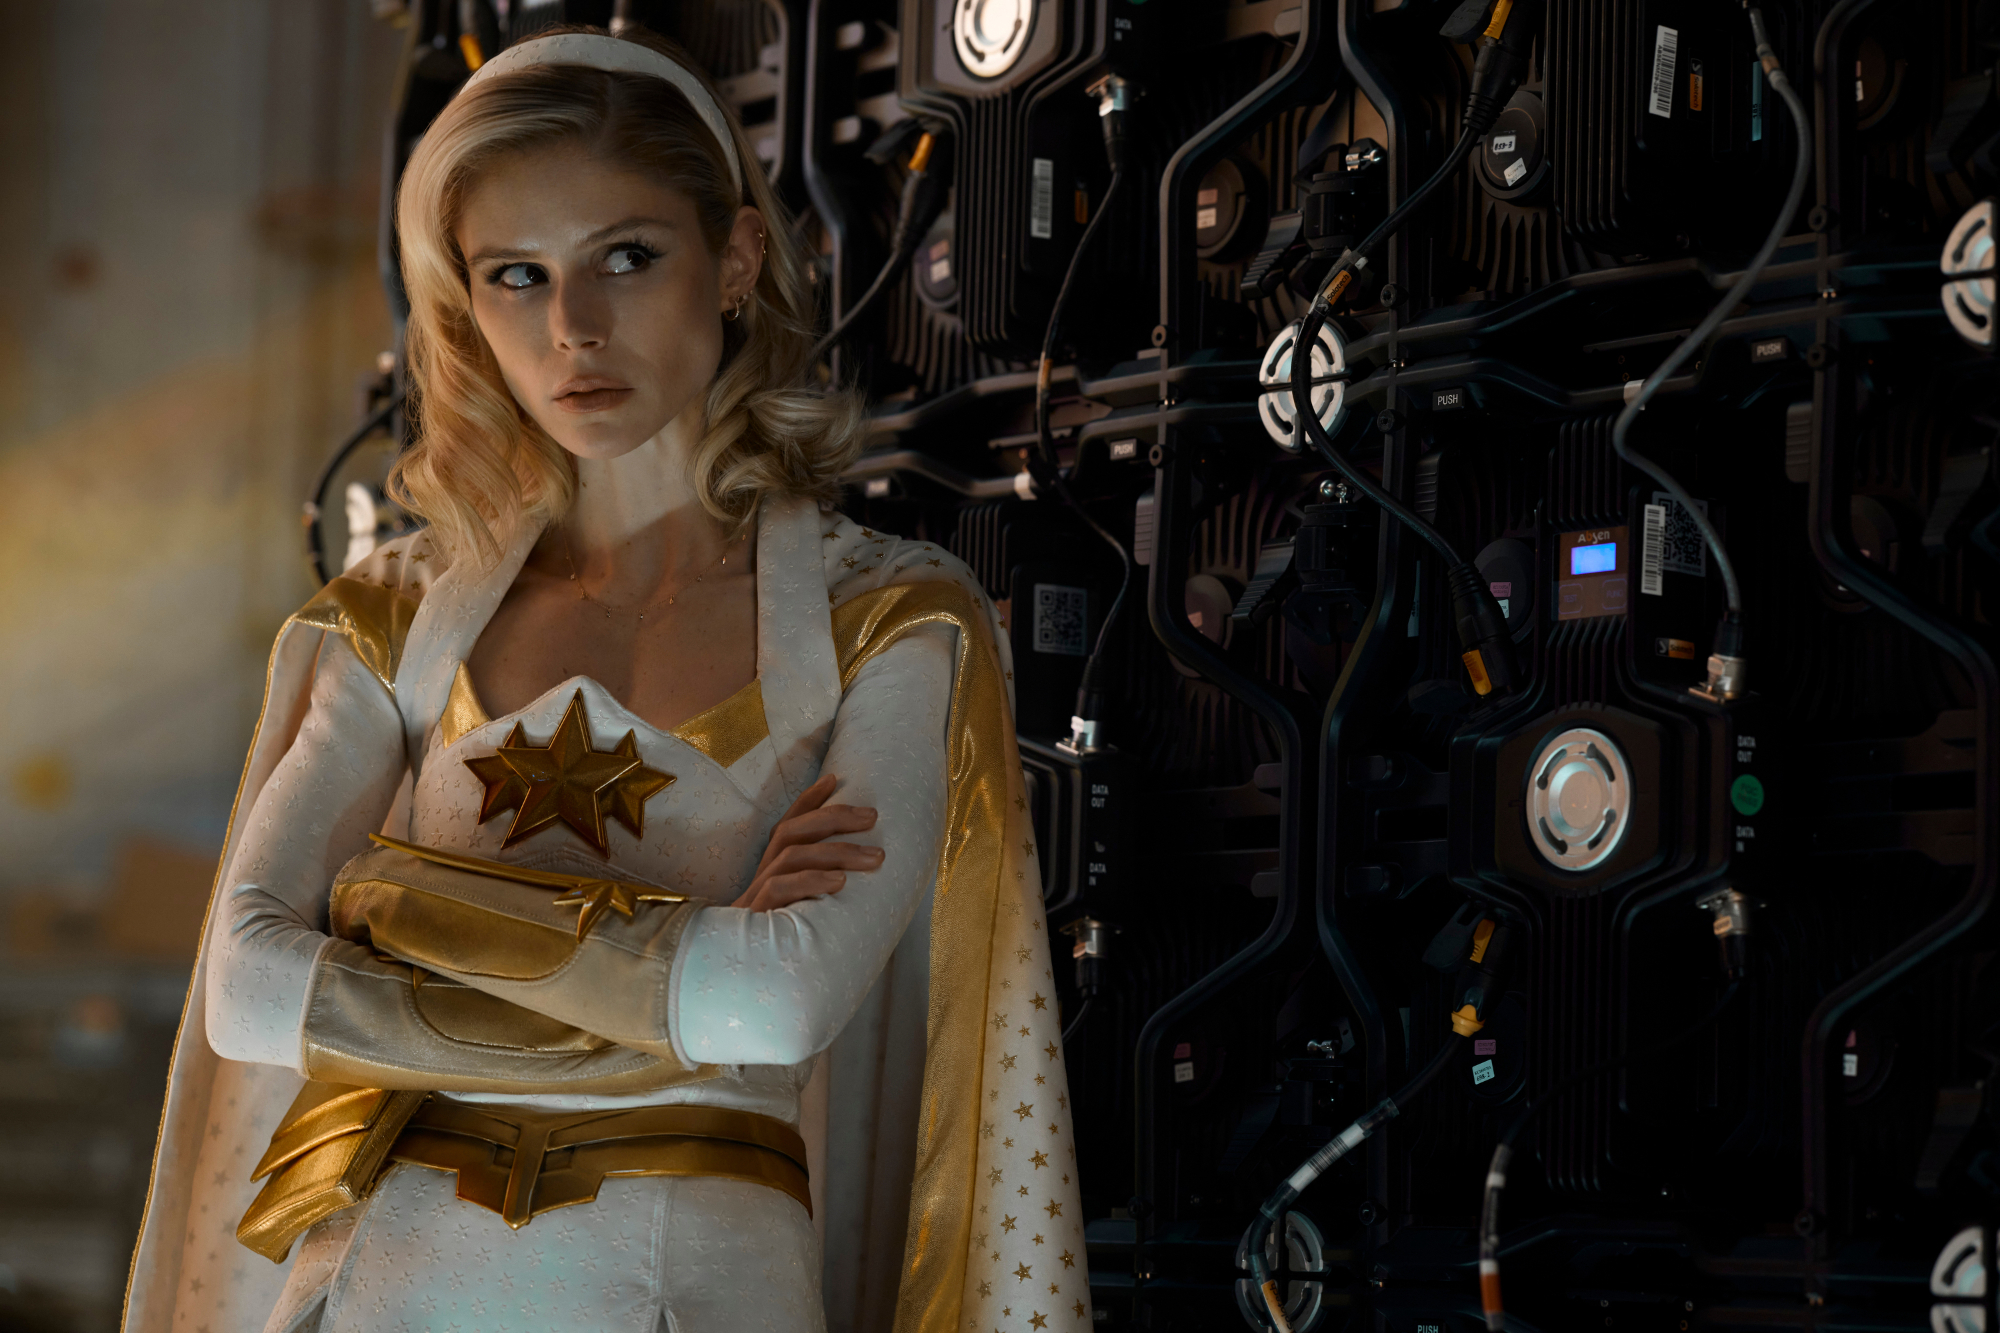 'The Boys' Season 3 Erin Moriarty as Starlight wearing her gold and white costume with her arms crossed